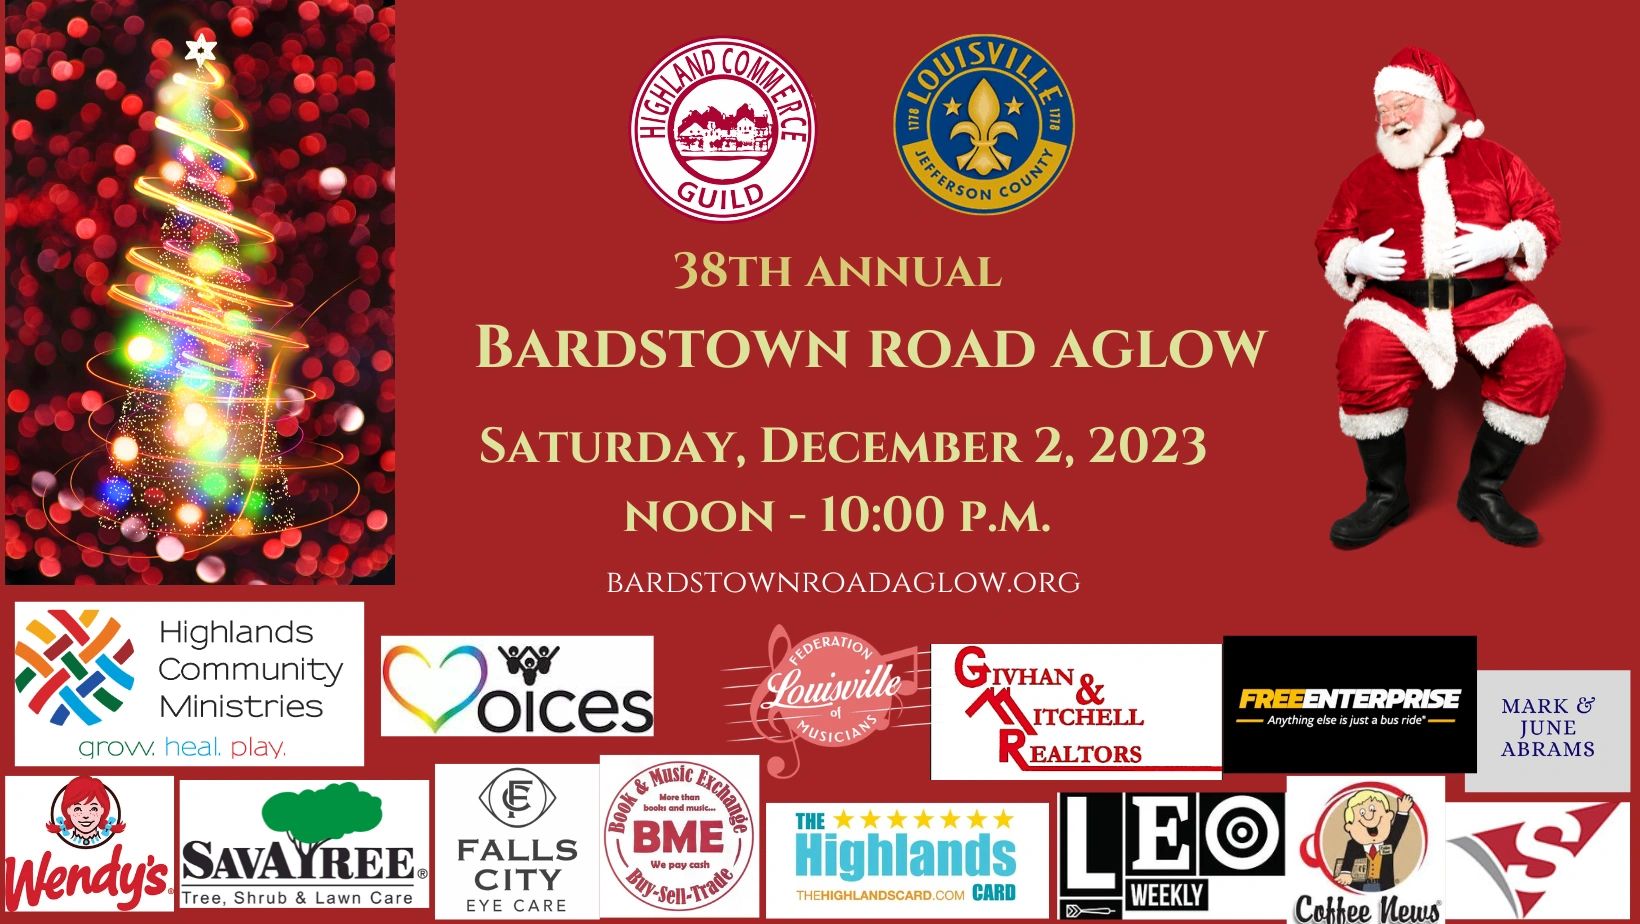 Bardstown Road Aglow Holiday Shopping, Holiday Light Up Festivities